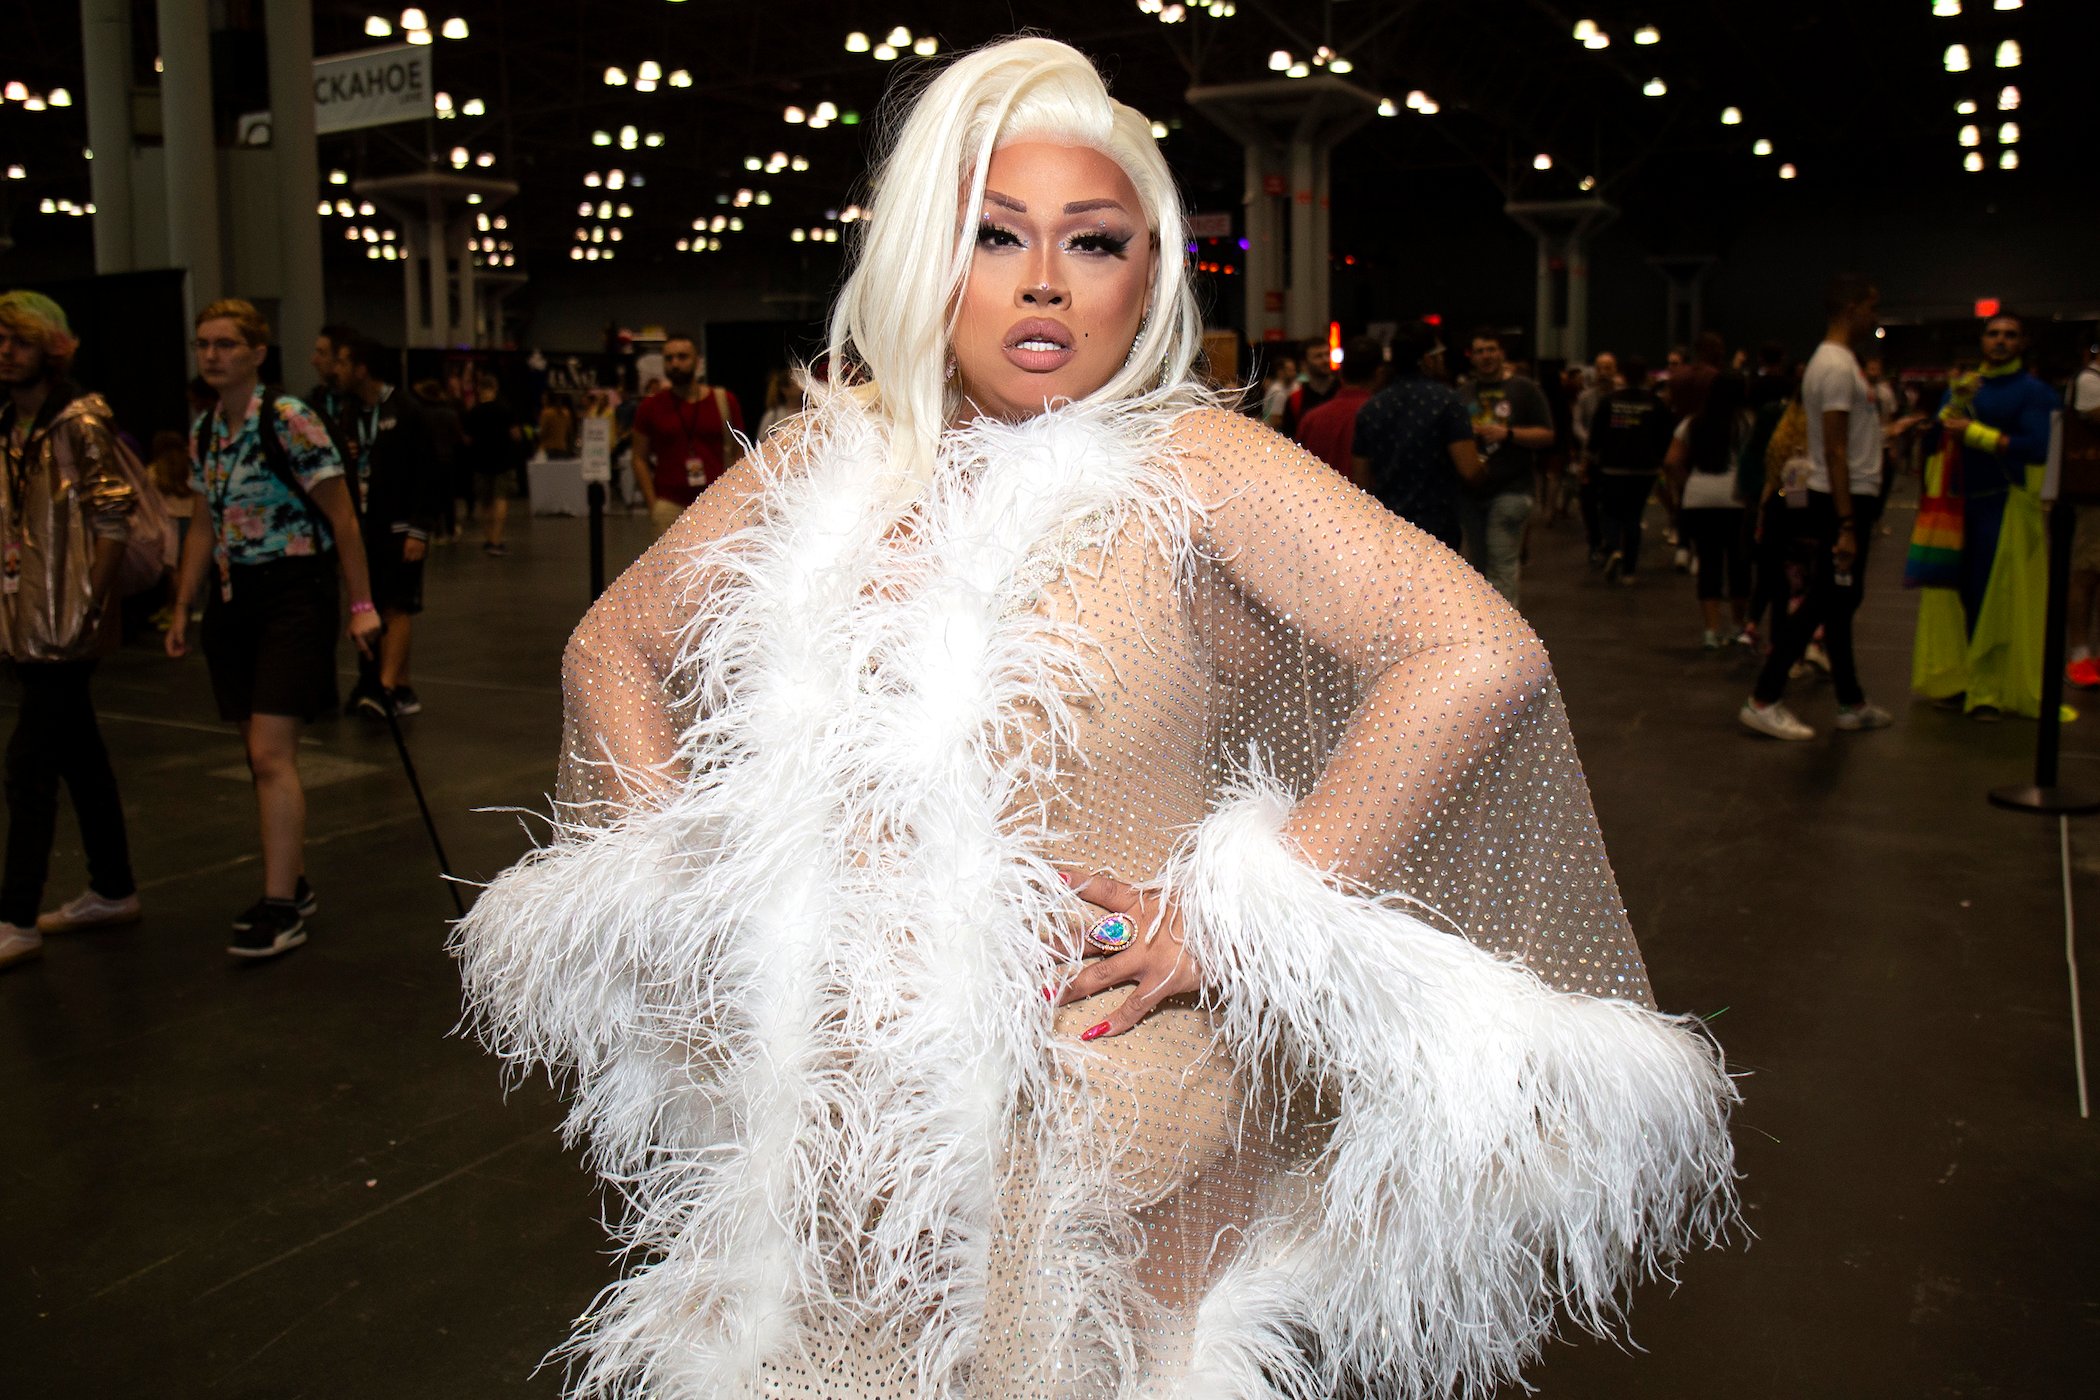 Jiggly Caliente attends RuPaul's DragCon 2019, dressed in white with blonde hair